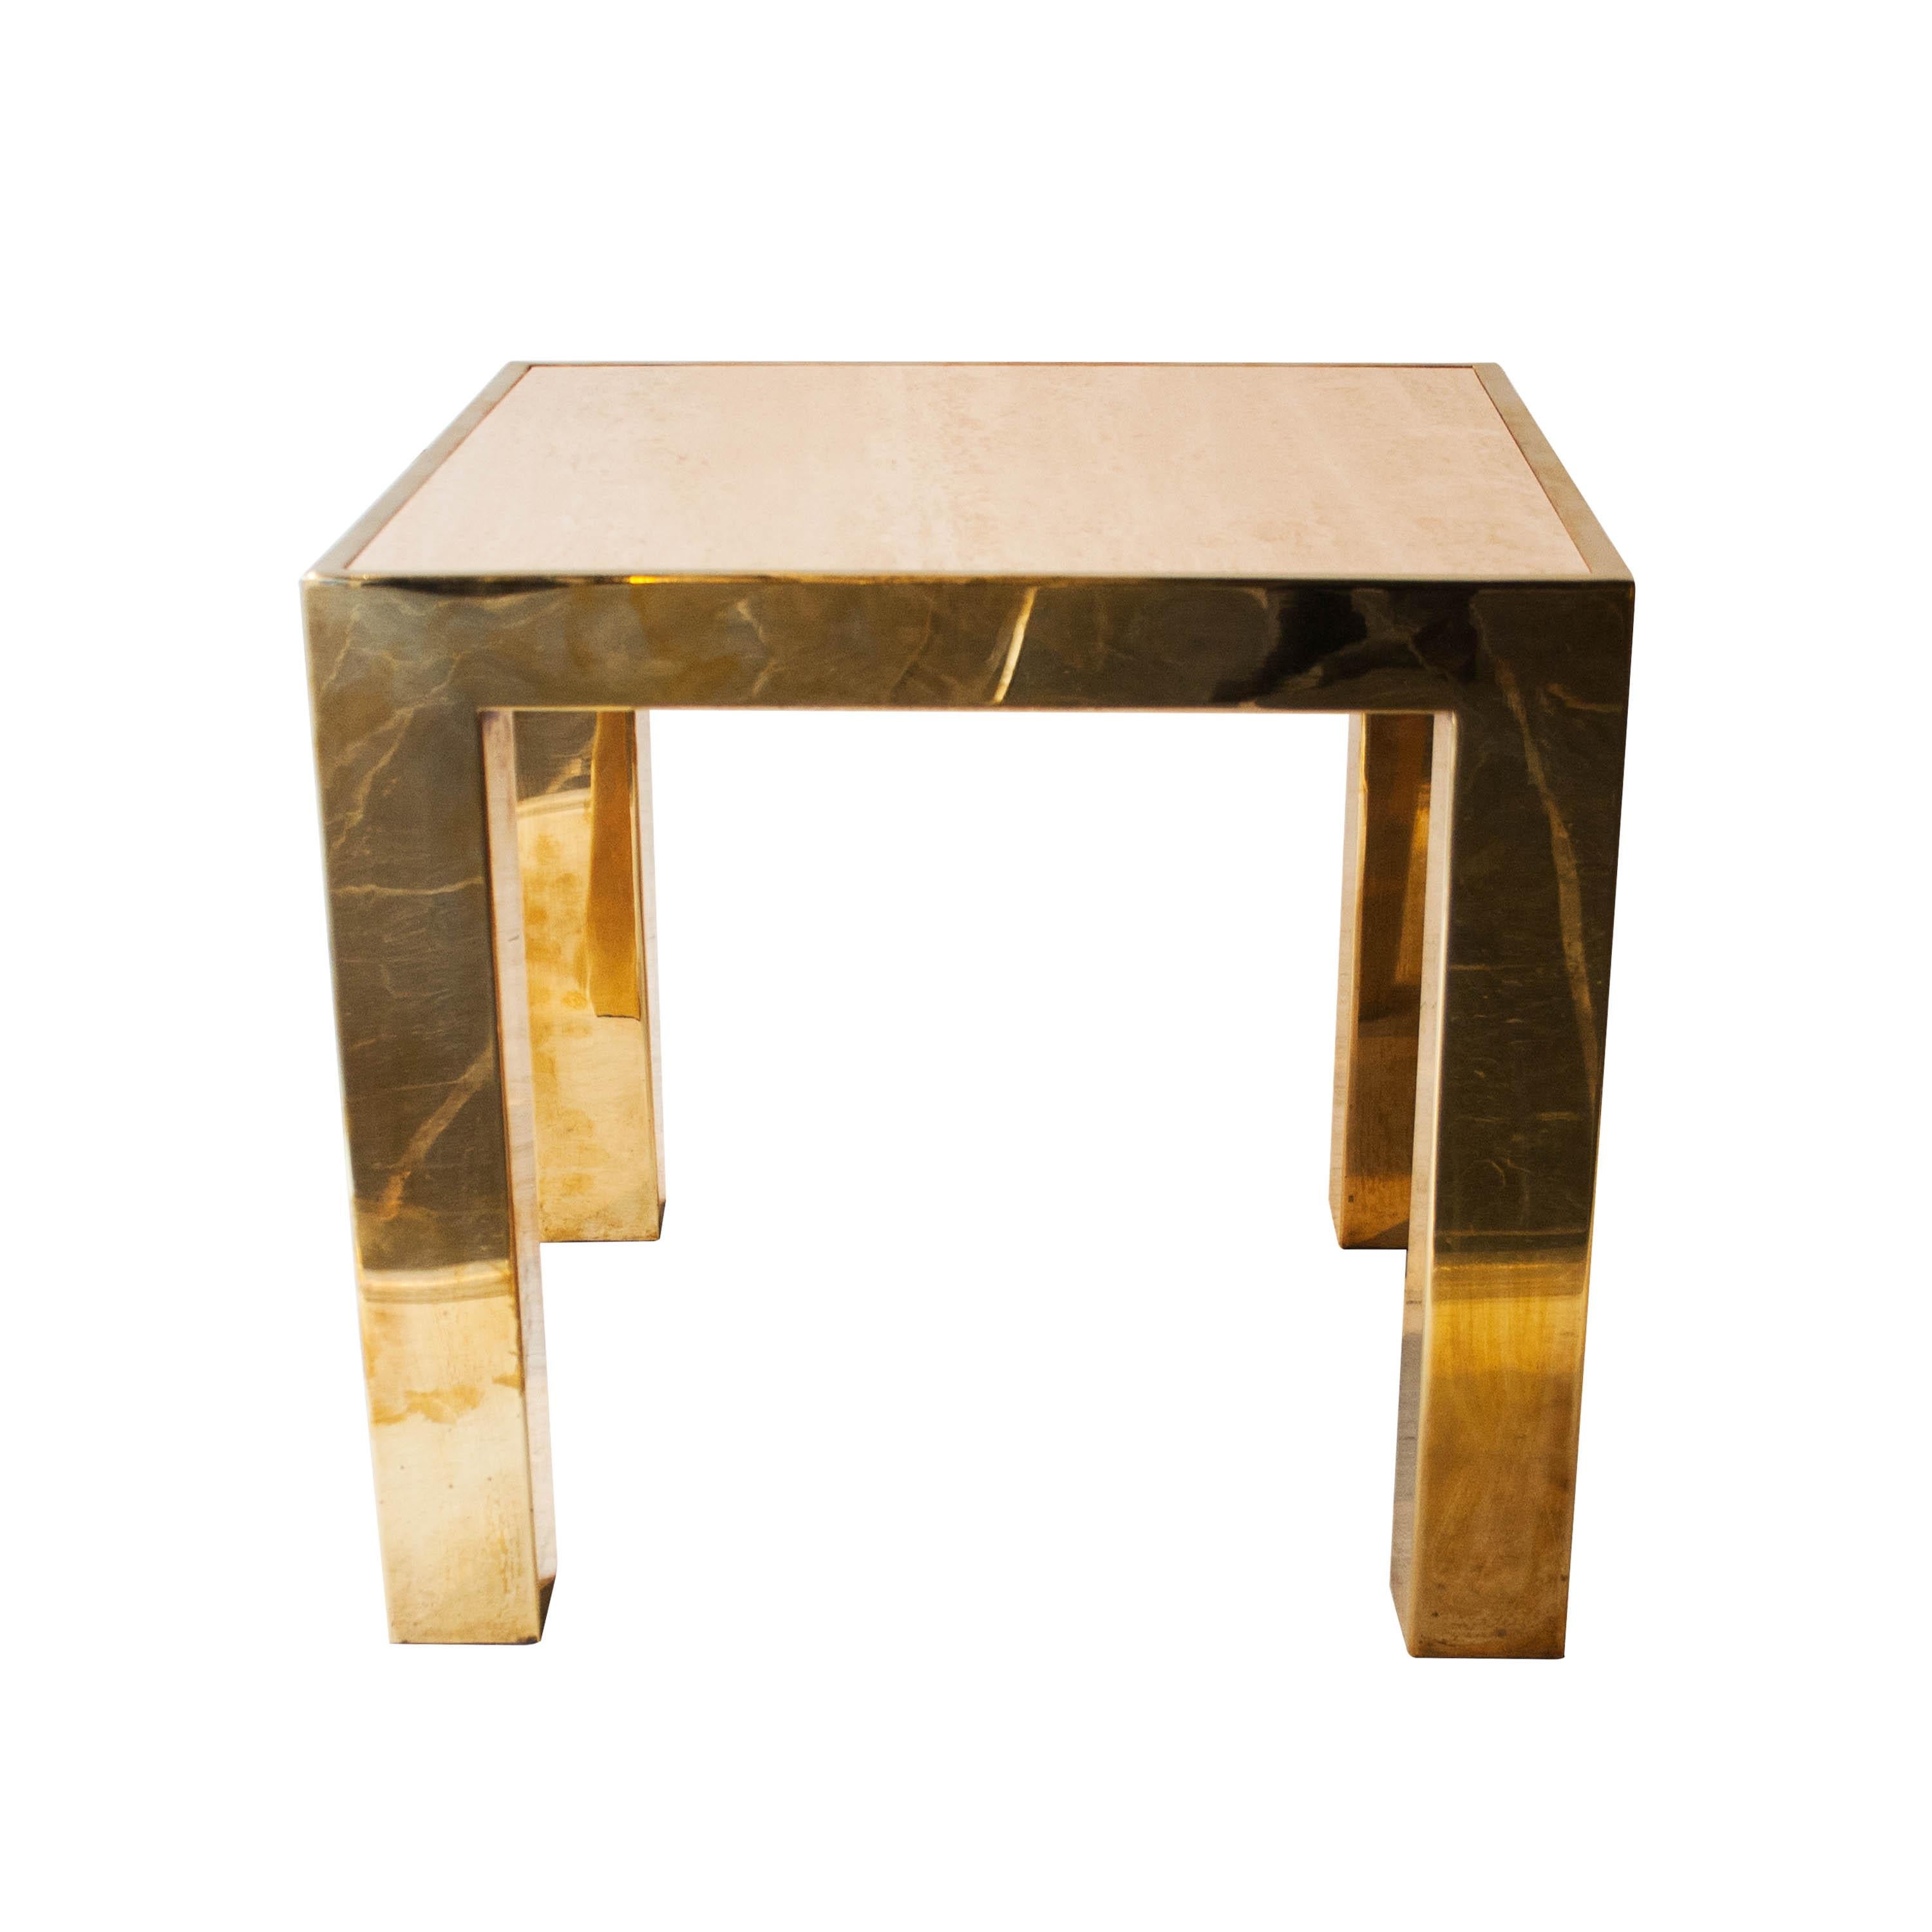 Side table with structure made of brass, with travertine marble top.